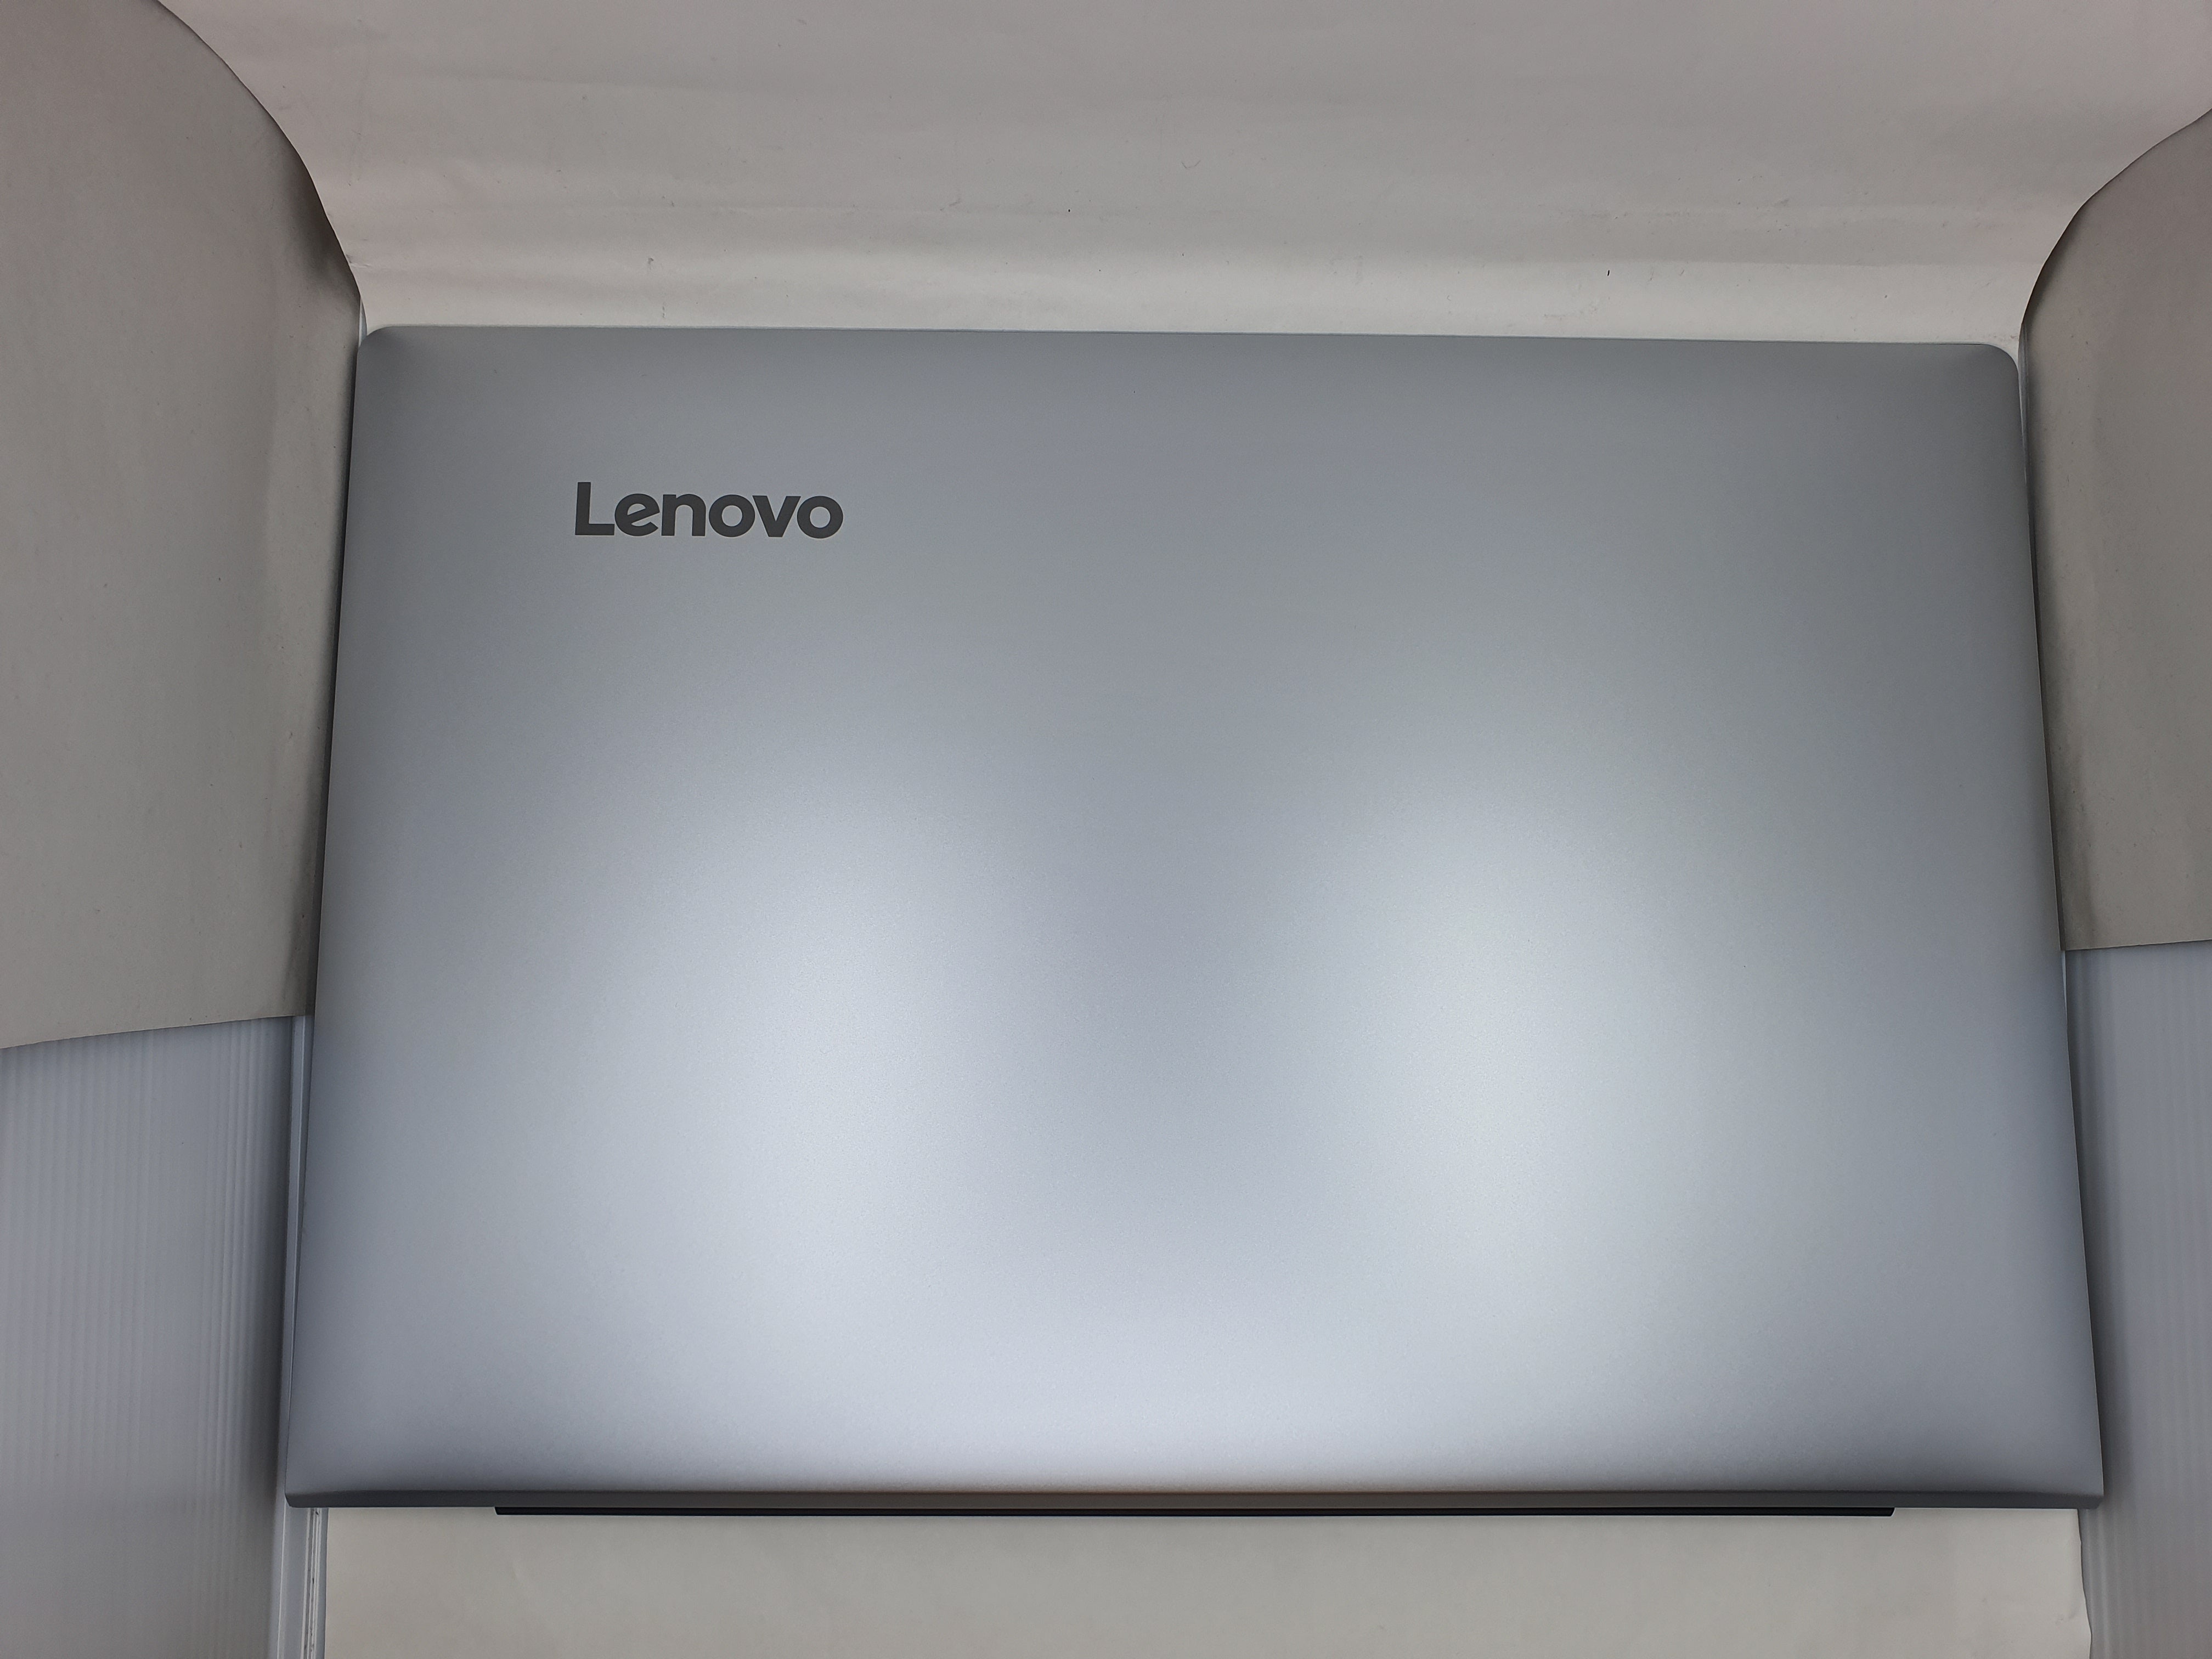 Lenovo LCD Cover 310-15IKB WL for Replacement - IdeaPad 310-15IKB